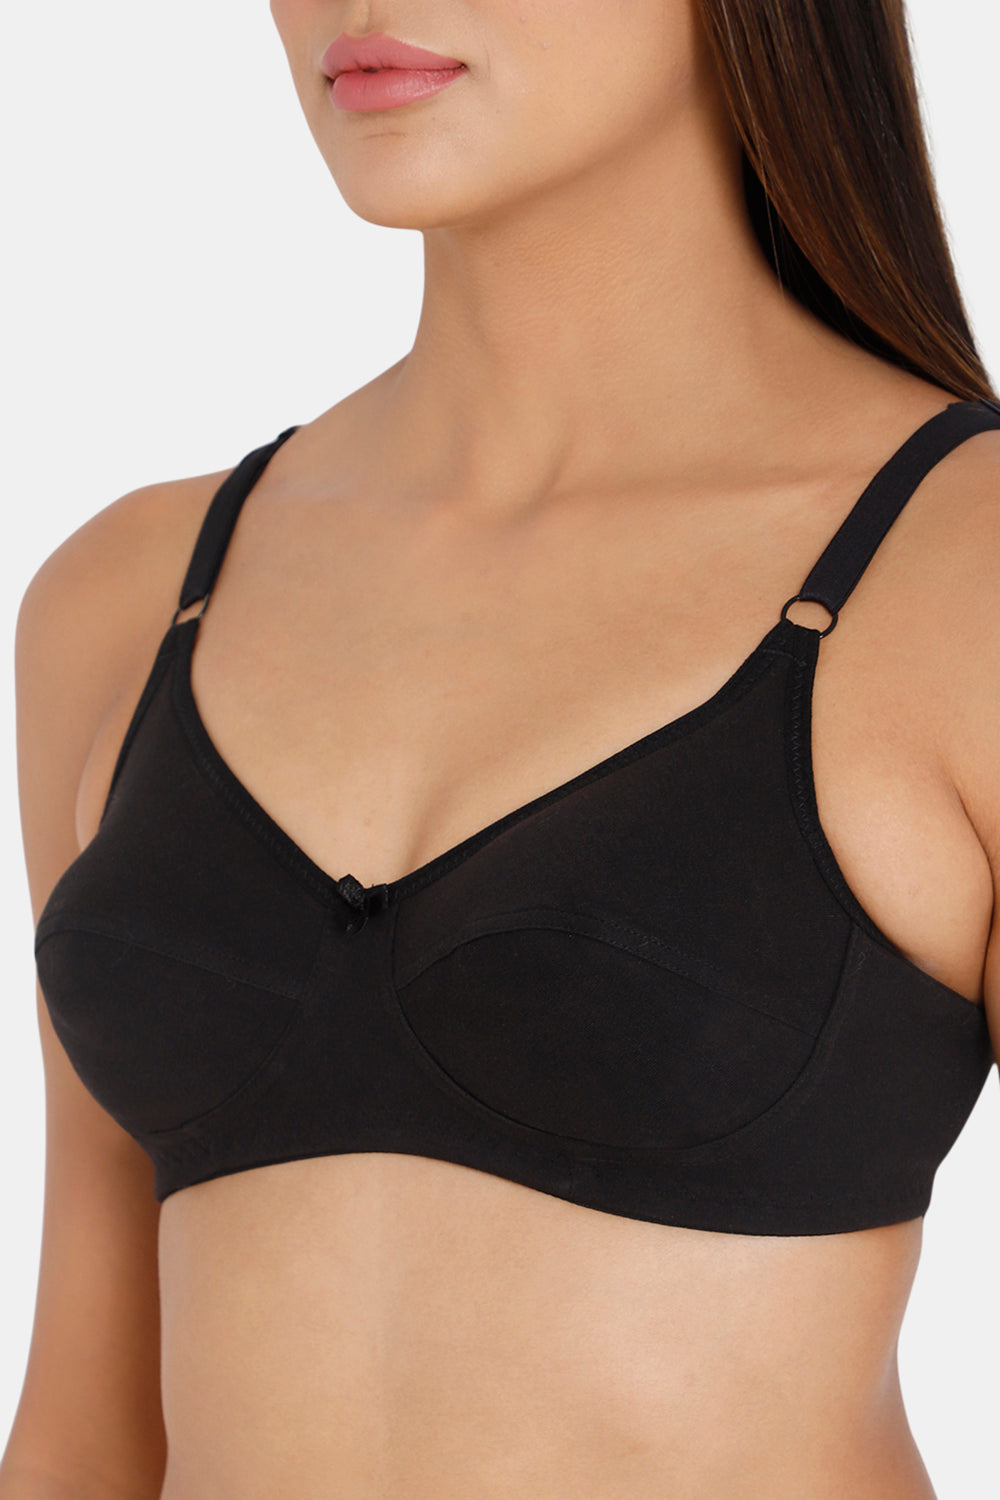 Broad and Adjustable Non-Padded Intimacy Mastectomy Bra - CA080